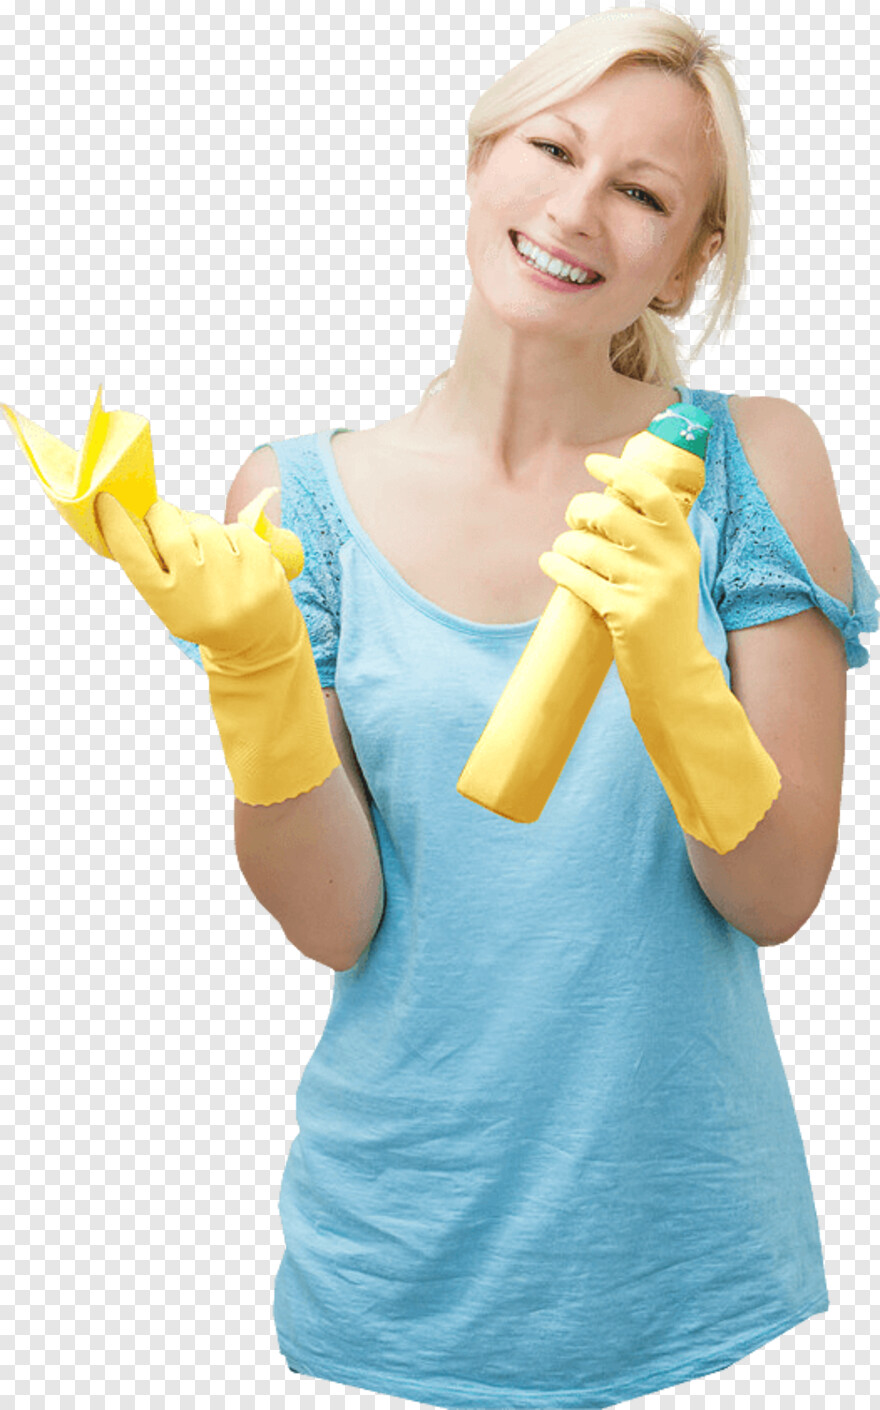 cleaning-icon # 1085606